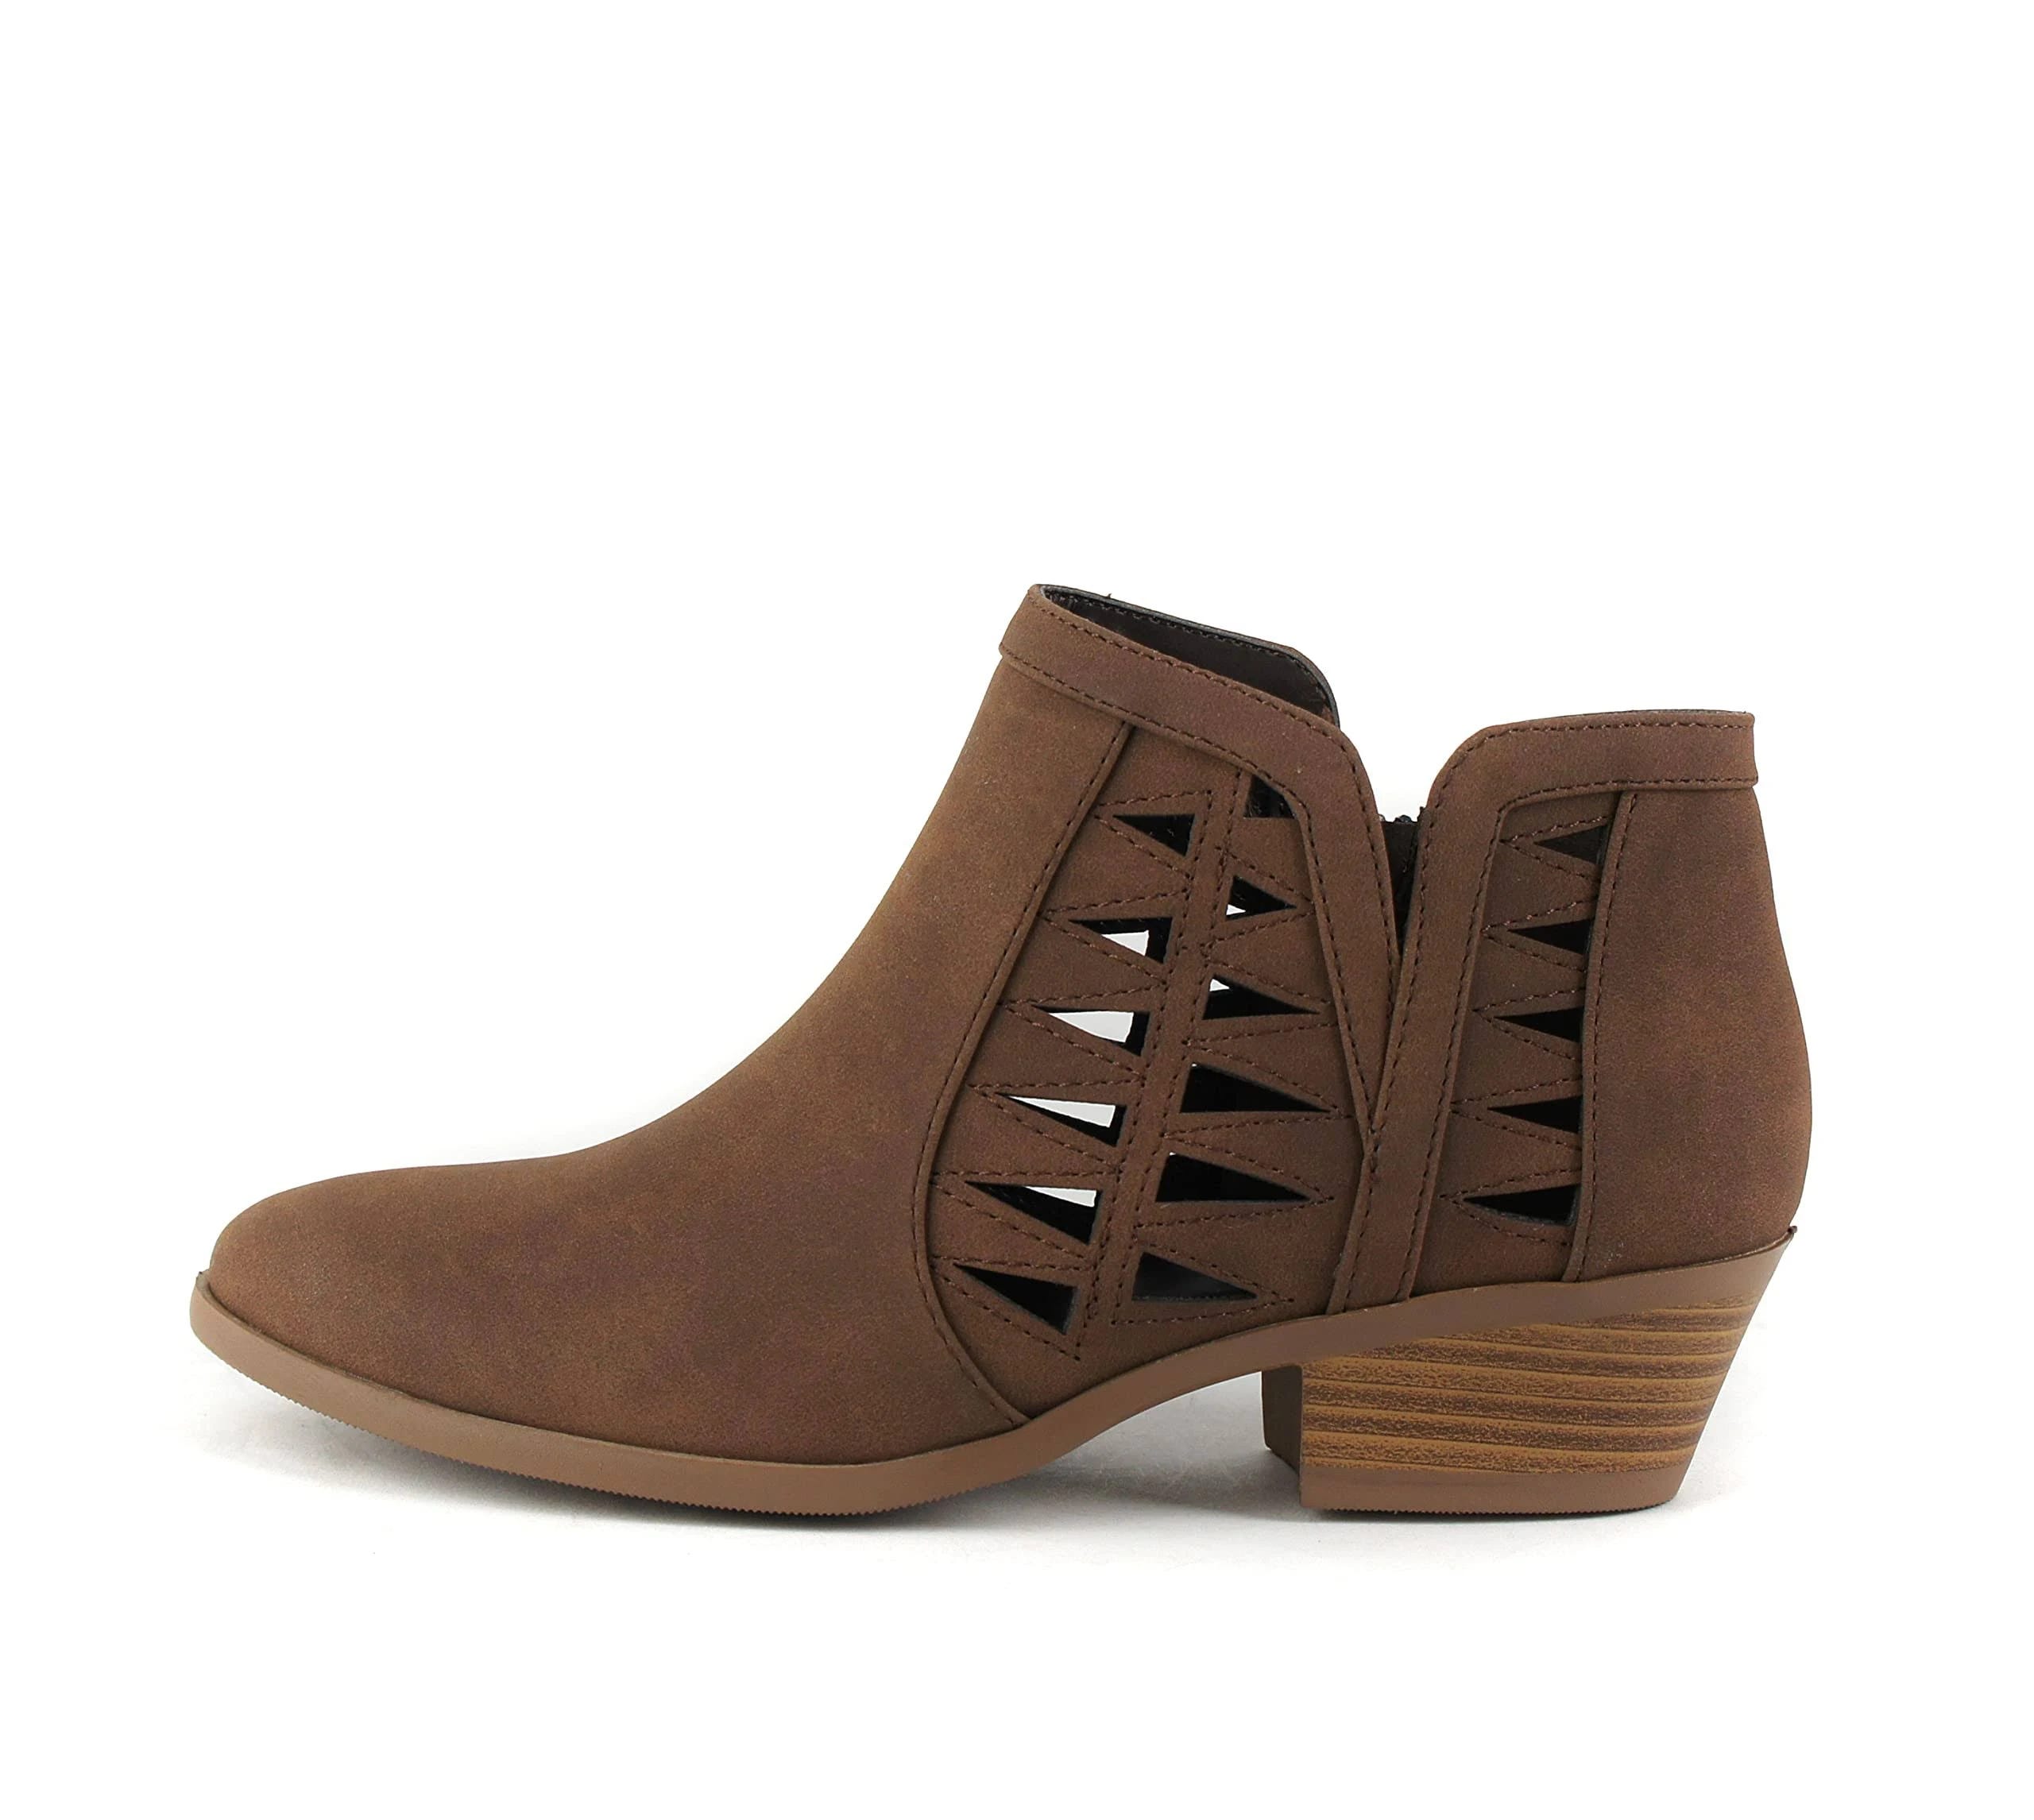 Slim Ankle Boot with Perforated Cut-Out Design | Image